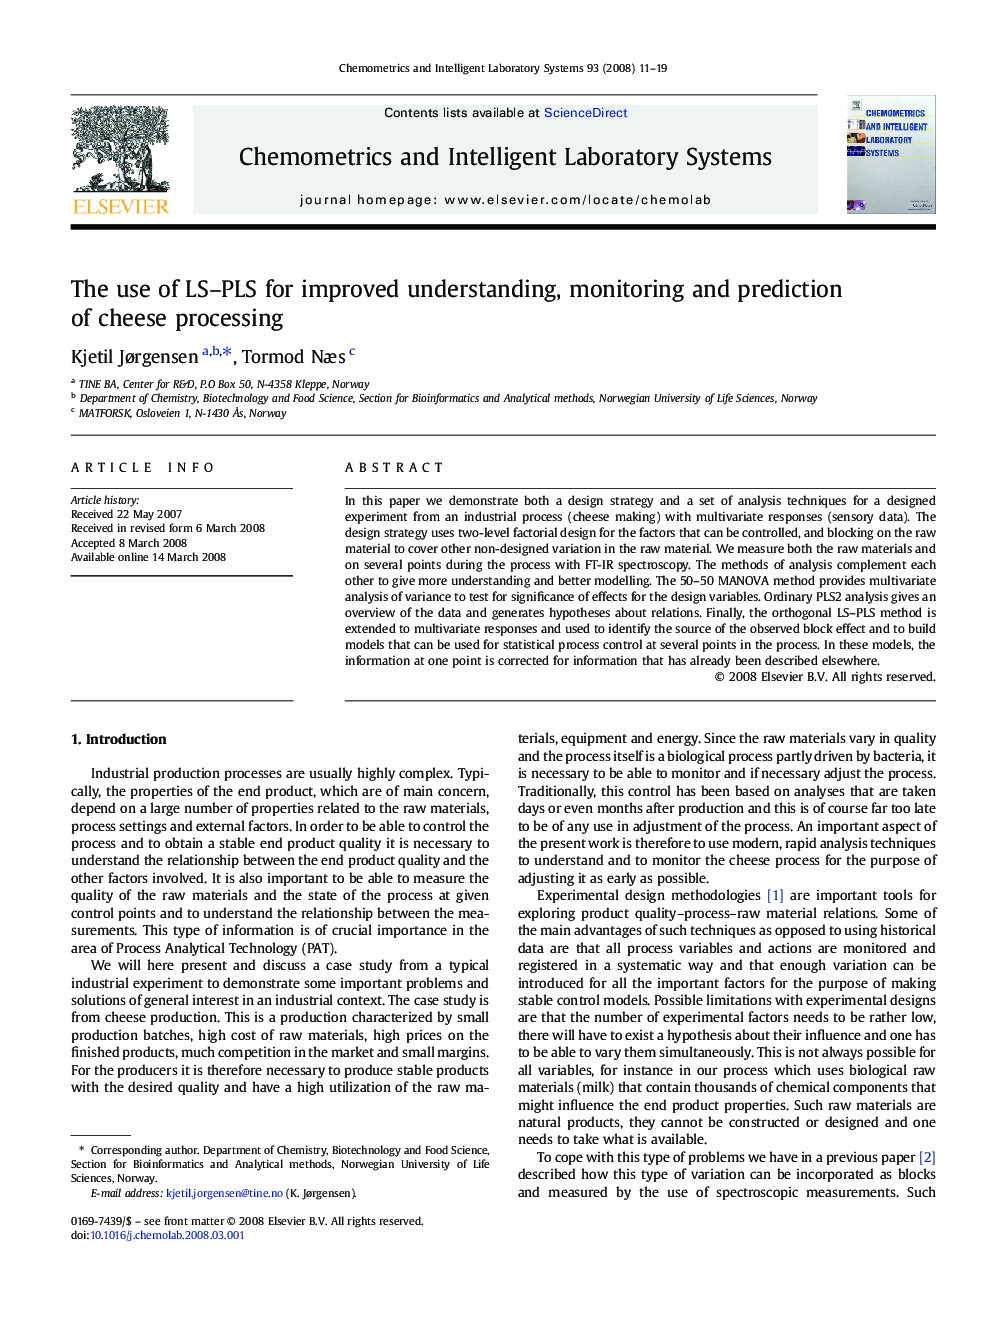 The use of LS–PLS for improved understanding, monitoring and prediction of cheese processing